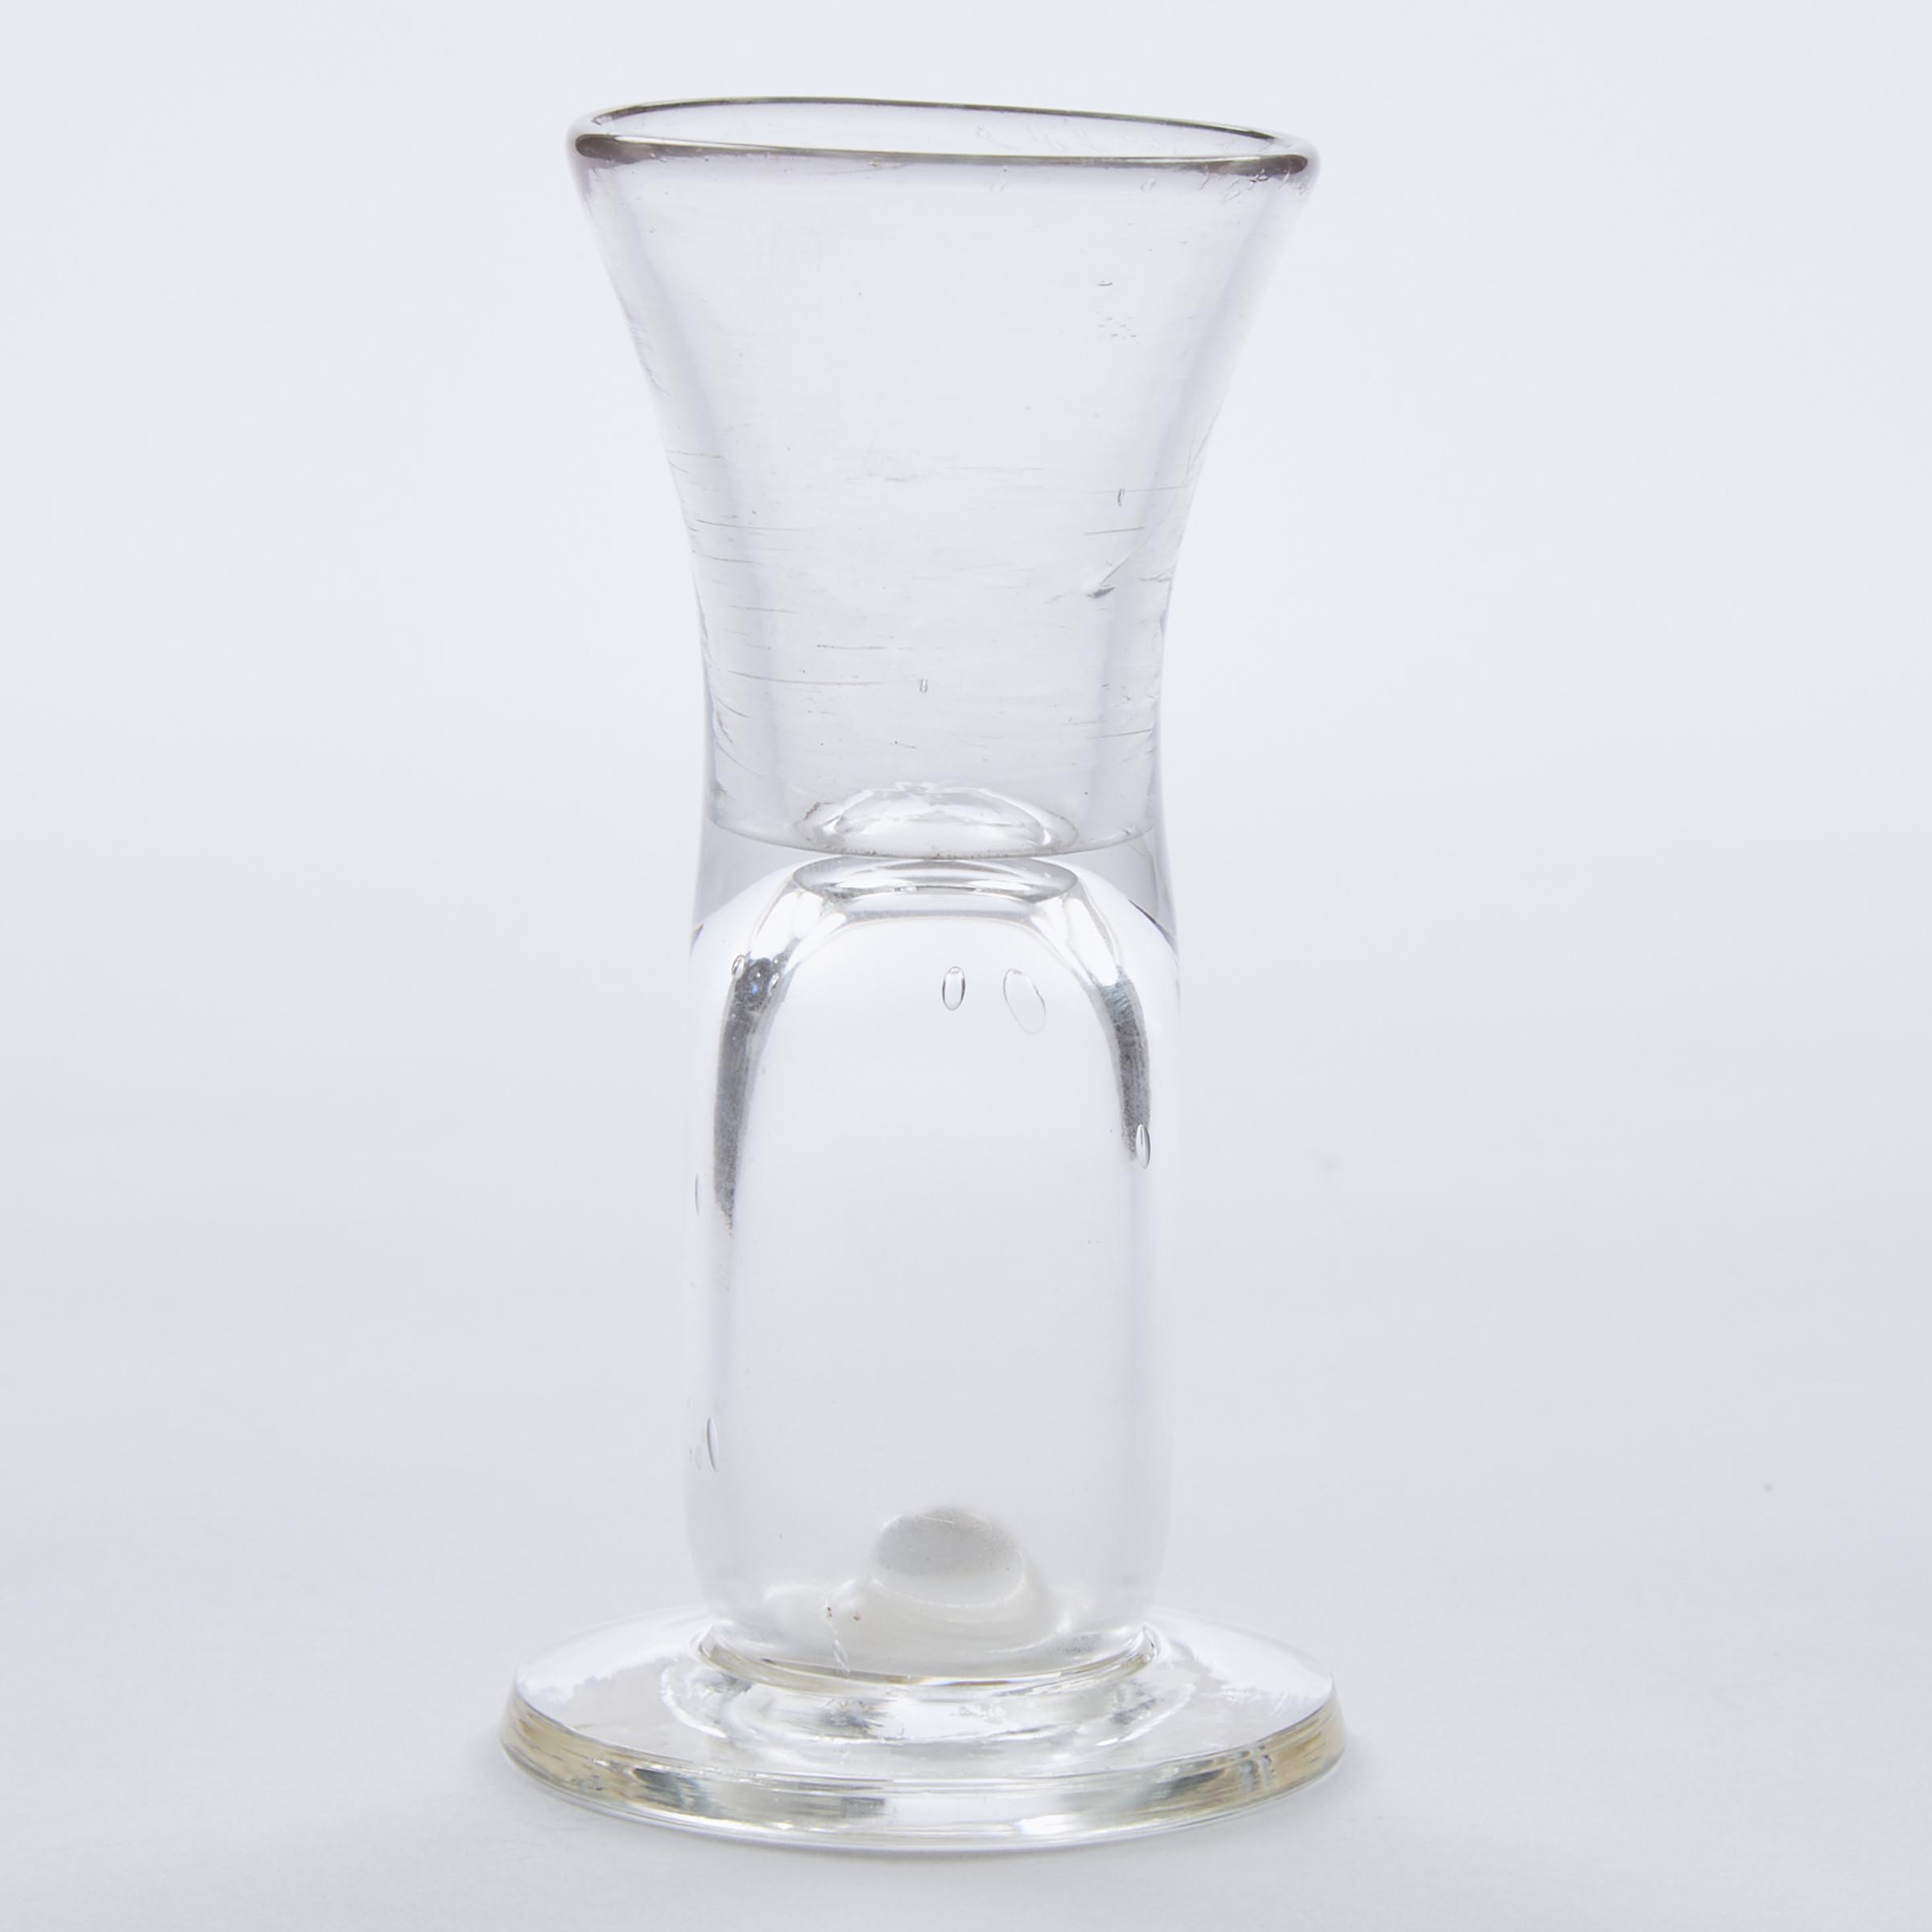 English Hollow Stemmed Dram Glass, late 18th century